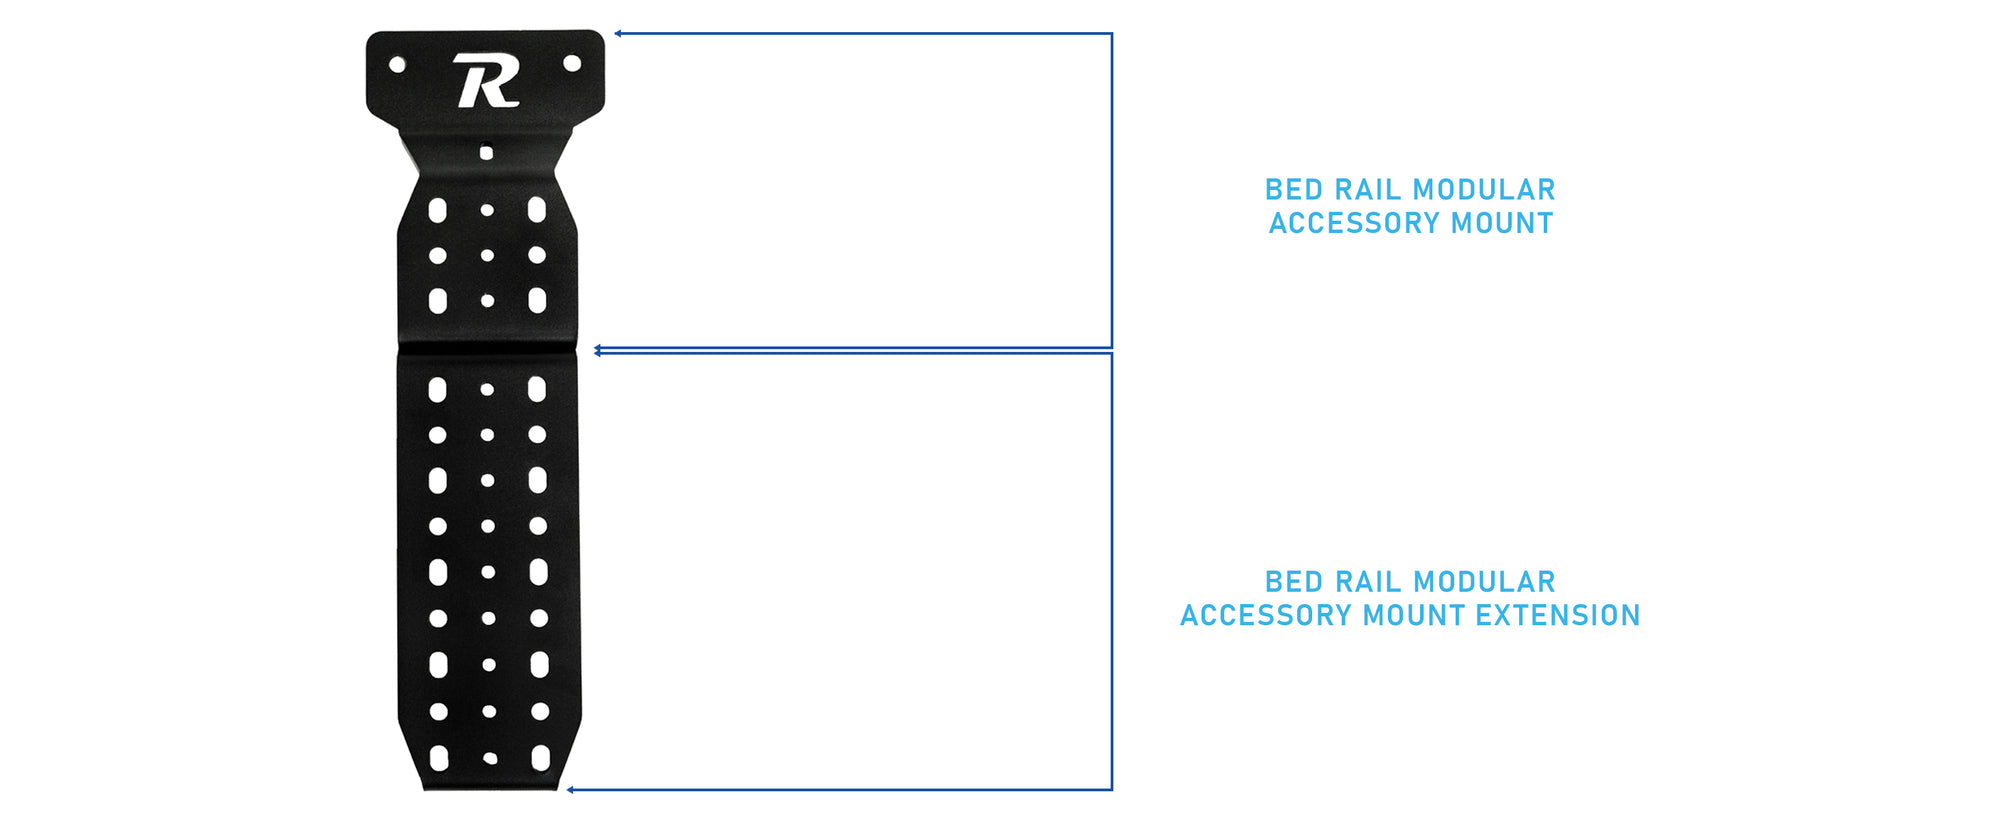 Image Pointing out the Bed Rail mount extension is an extension of the modular bed rail mount.